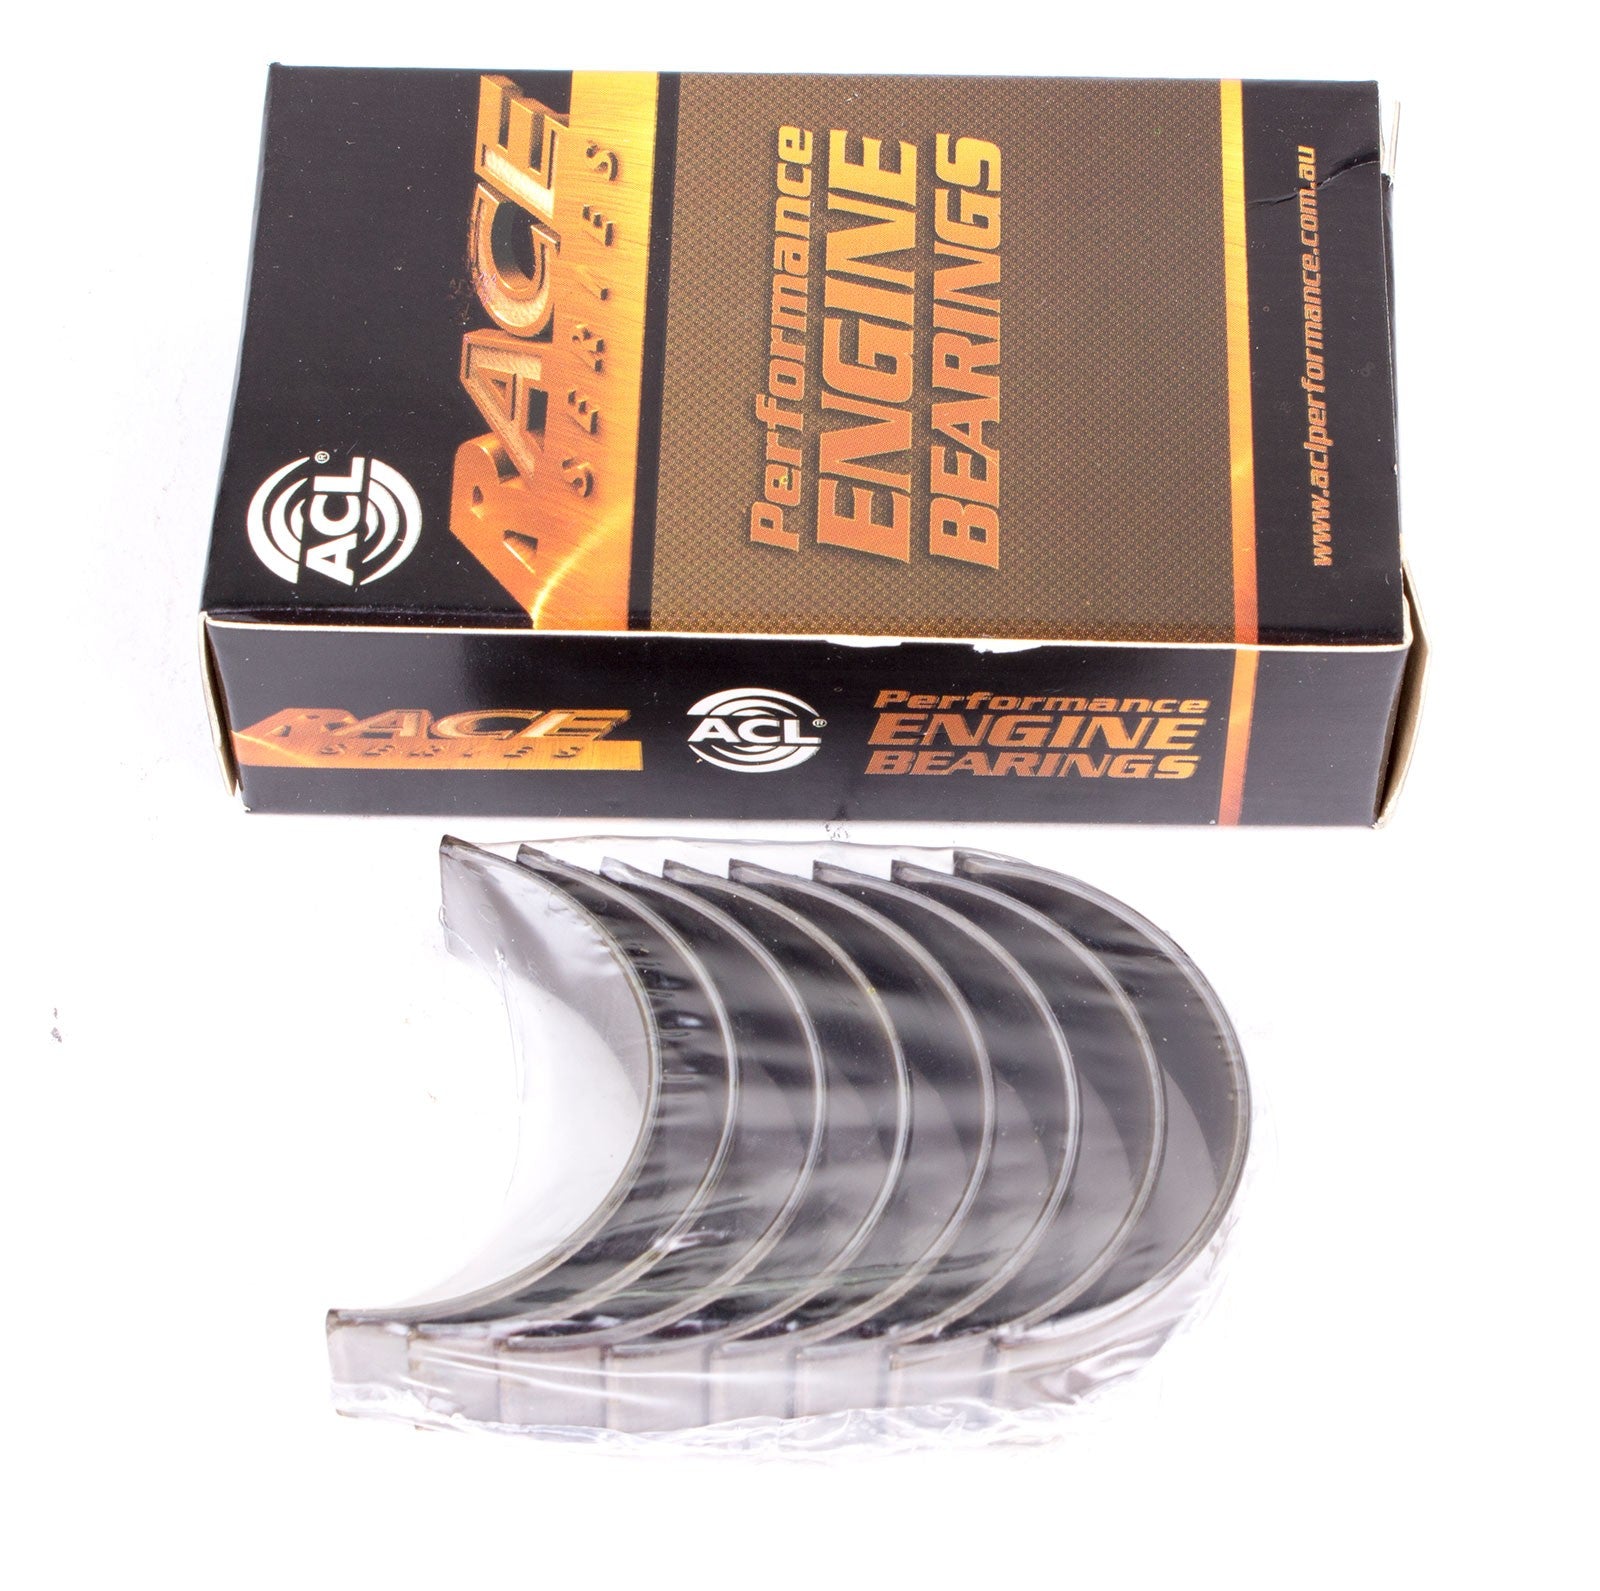 ACL 5M590H-010 Main bearing set (ACL Race Series) Photo-0 